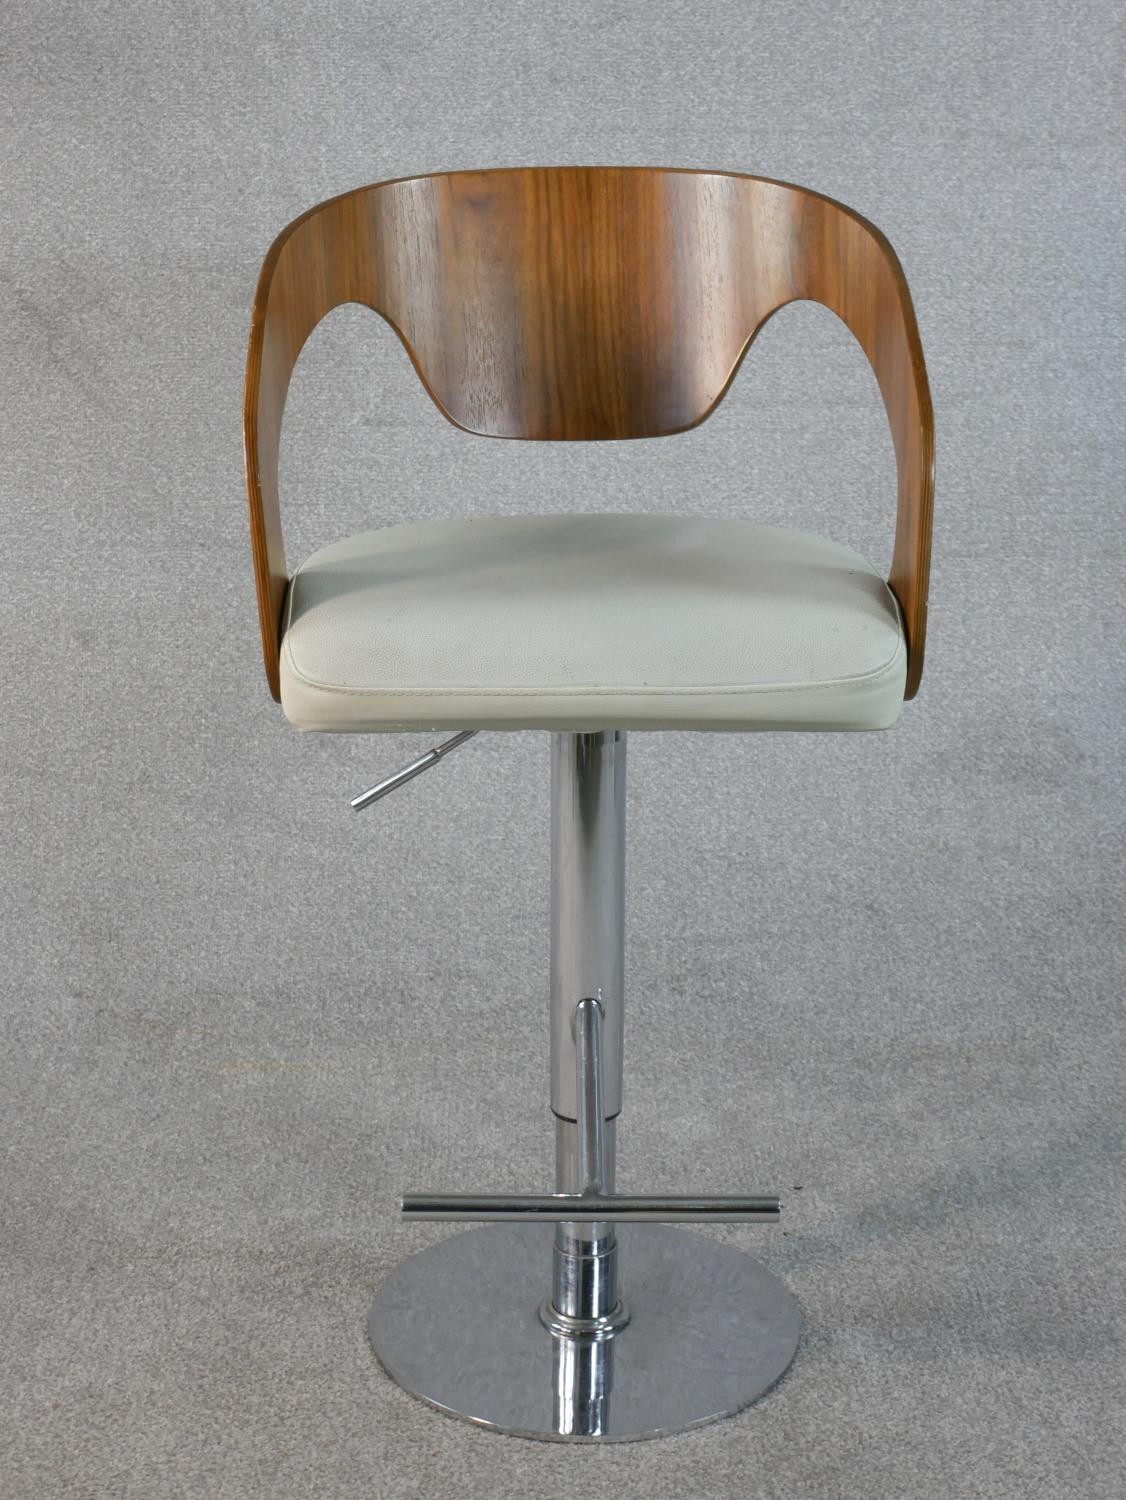 A contemporary adjustable height bar stool, with a curved walnut back and a white leather seat on